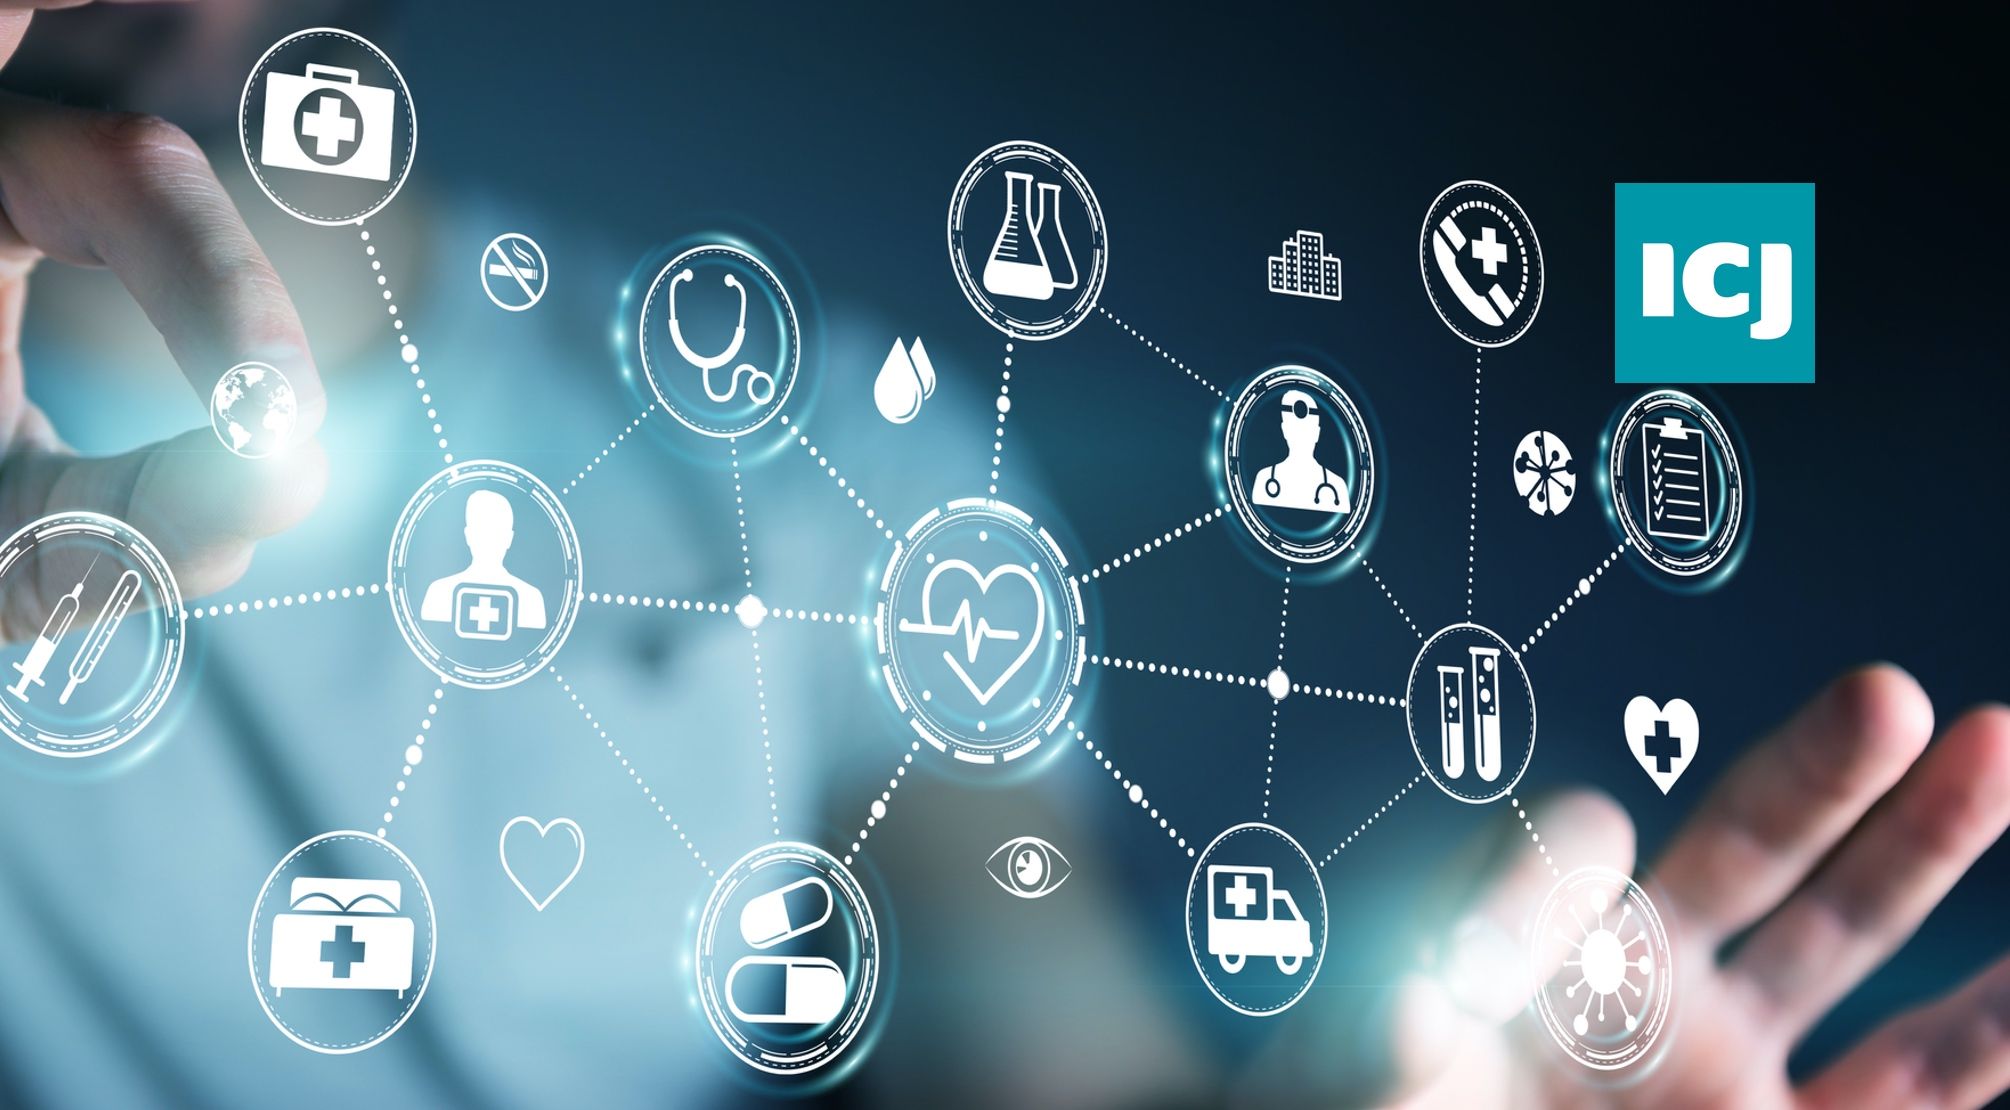 Aligning value and incentives to make digital health really work